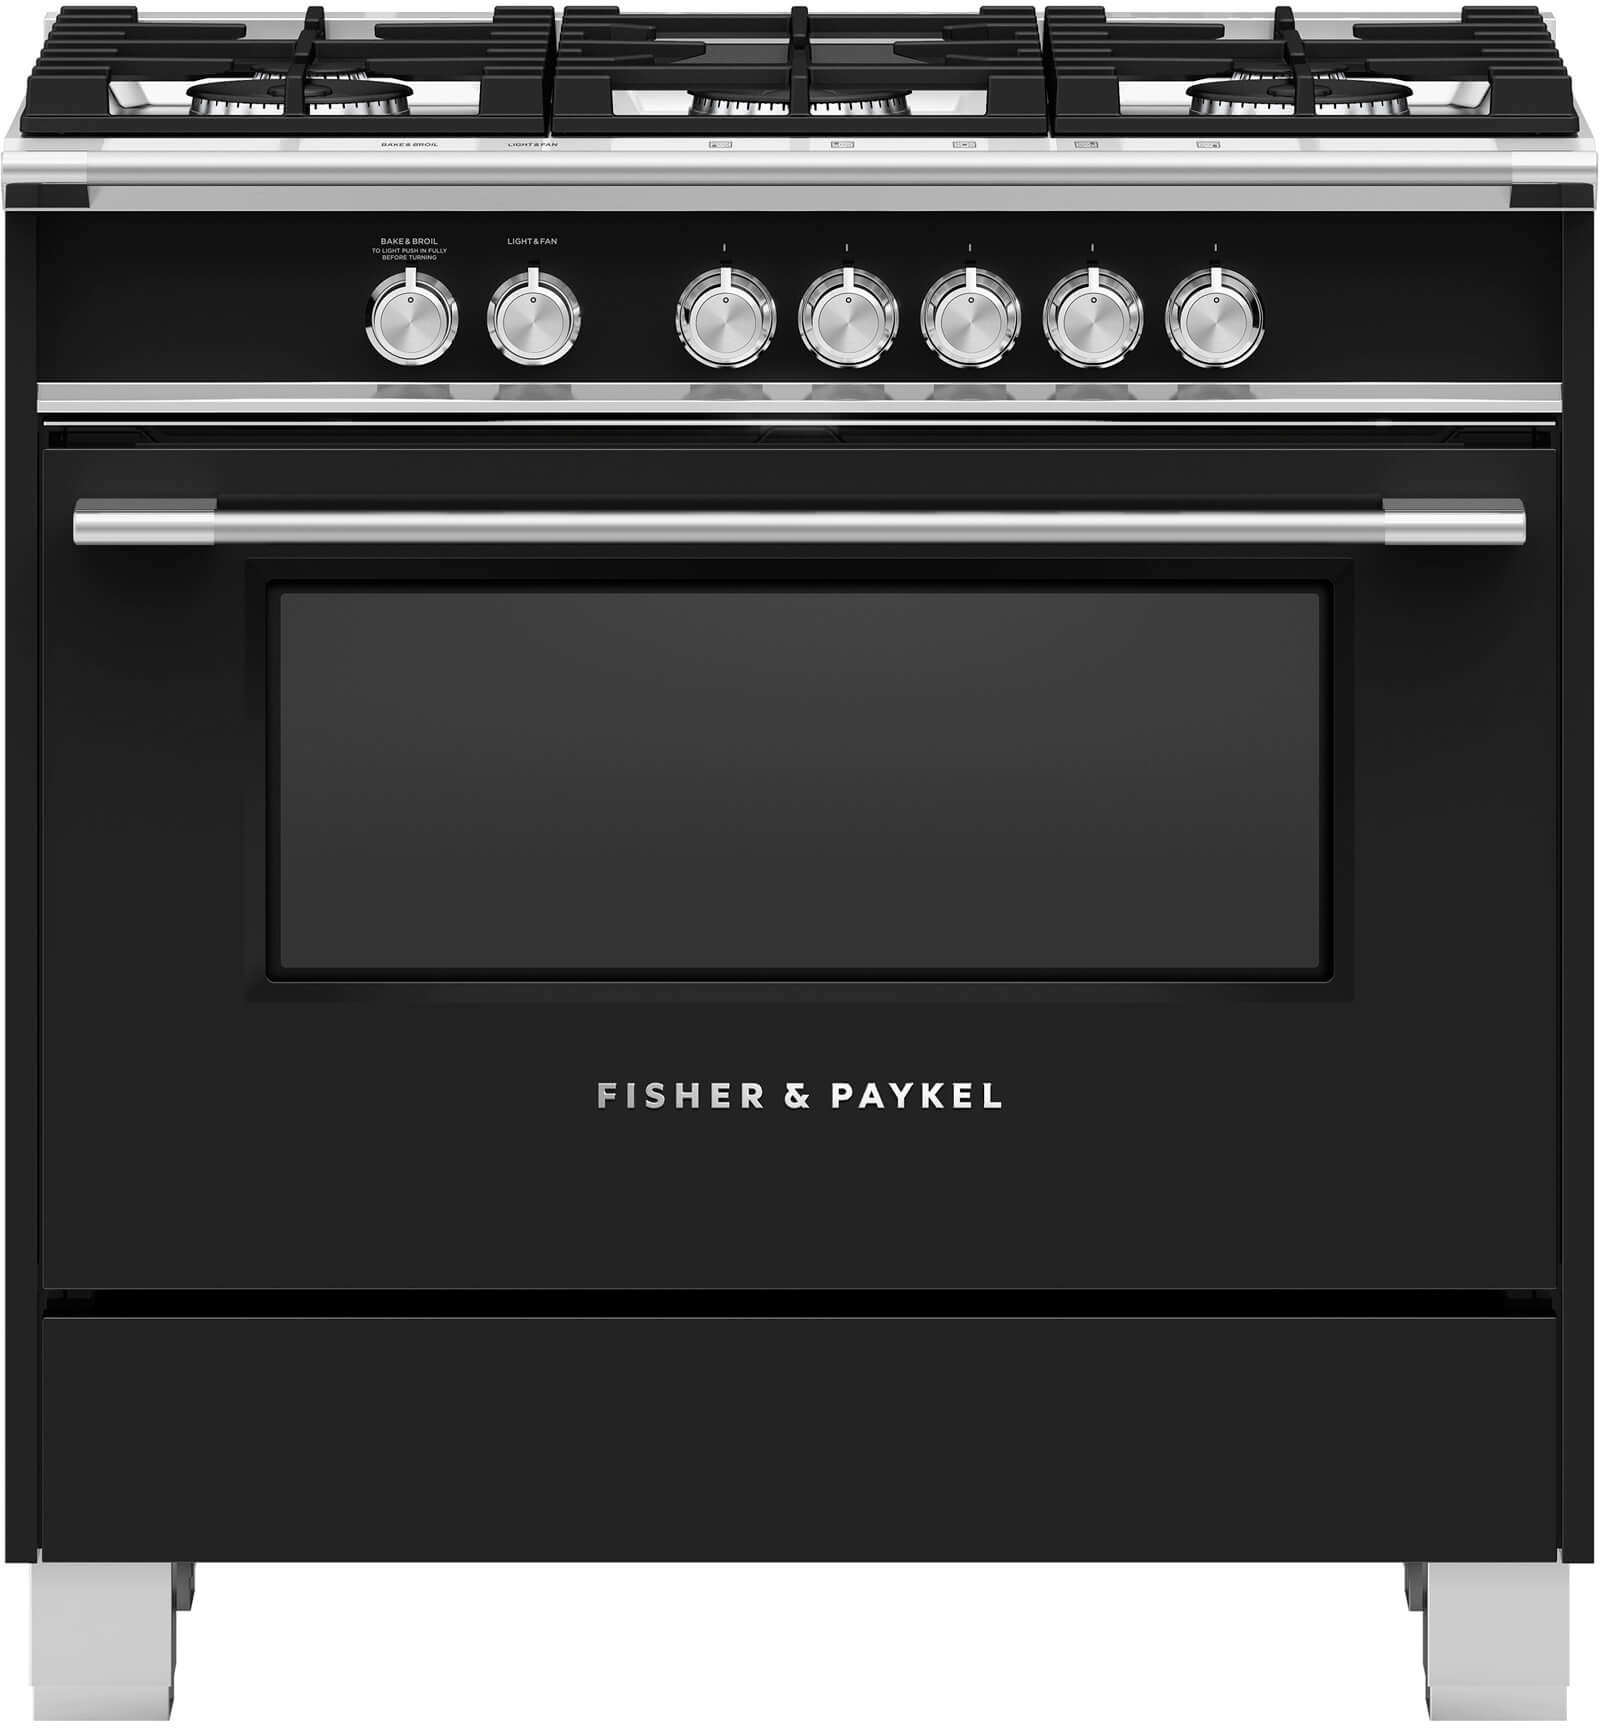 Fisher & Paykel Series 7 classic 36 Freestanding Natural Gas Range OR36SCG4B1